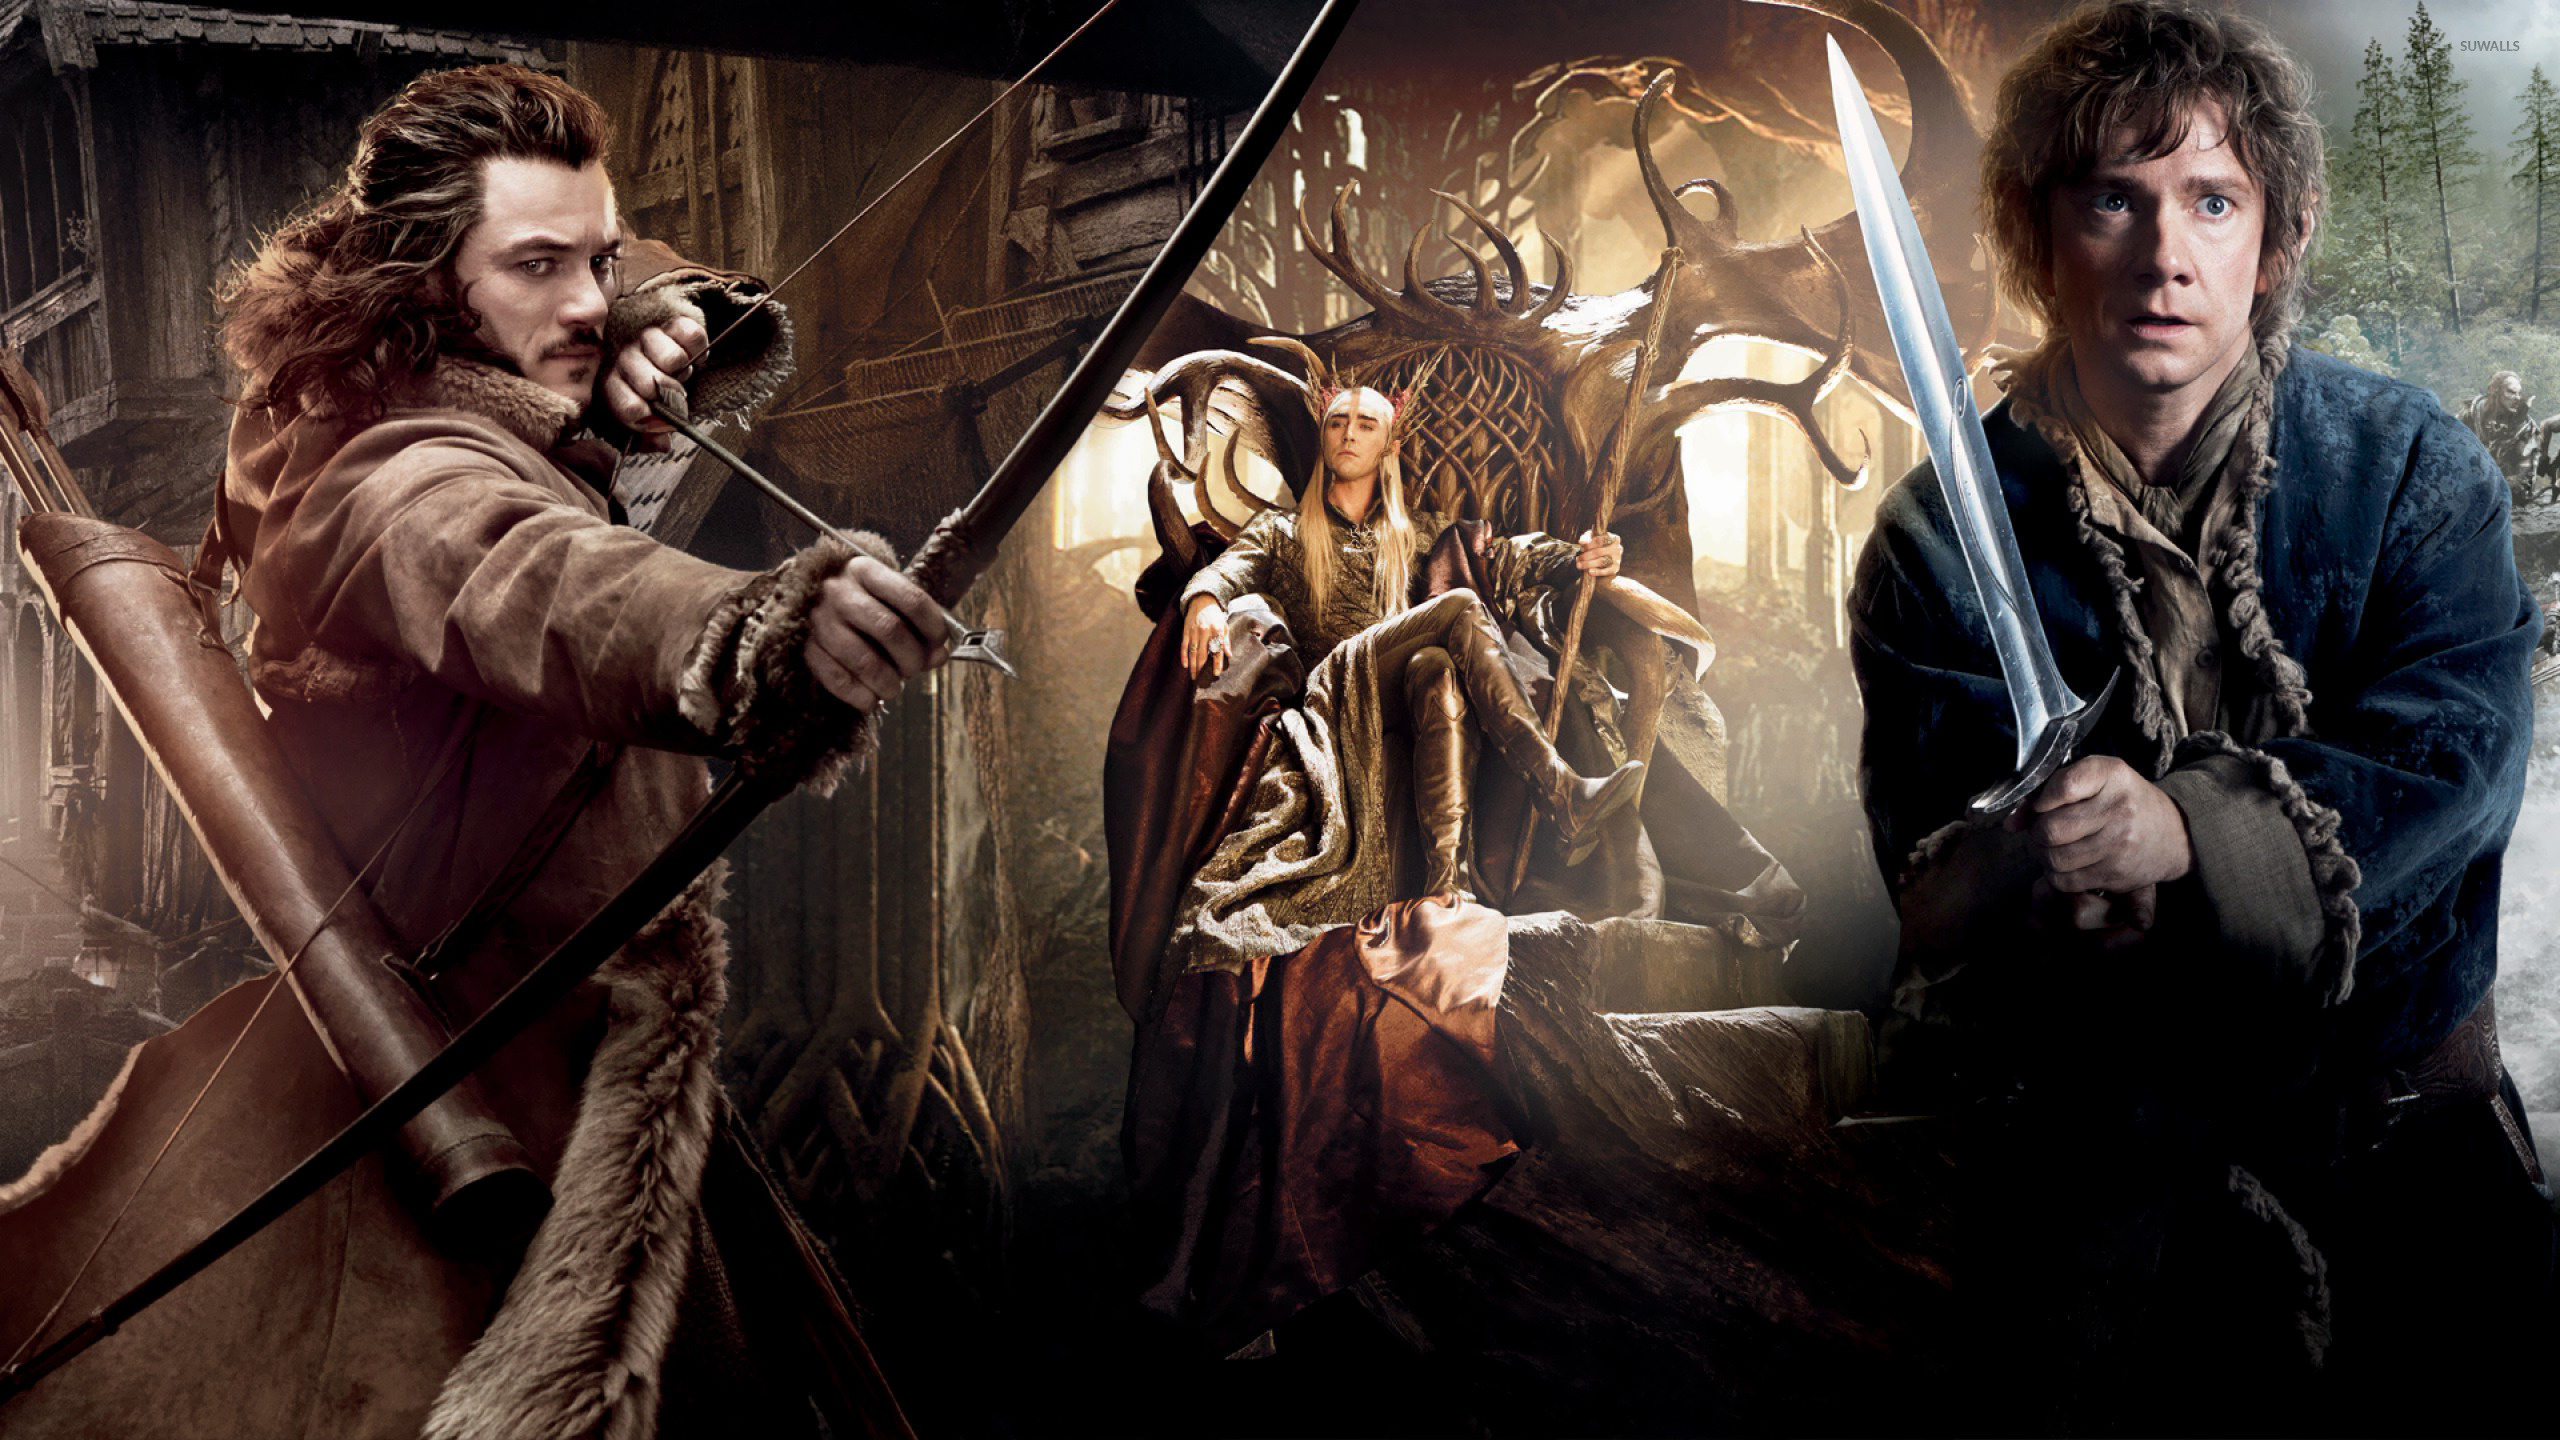 Movie wallpaper, Desolation of Smaug, Epic adventure, Middle-earth quest, 2560x1440 HD Desktop